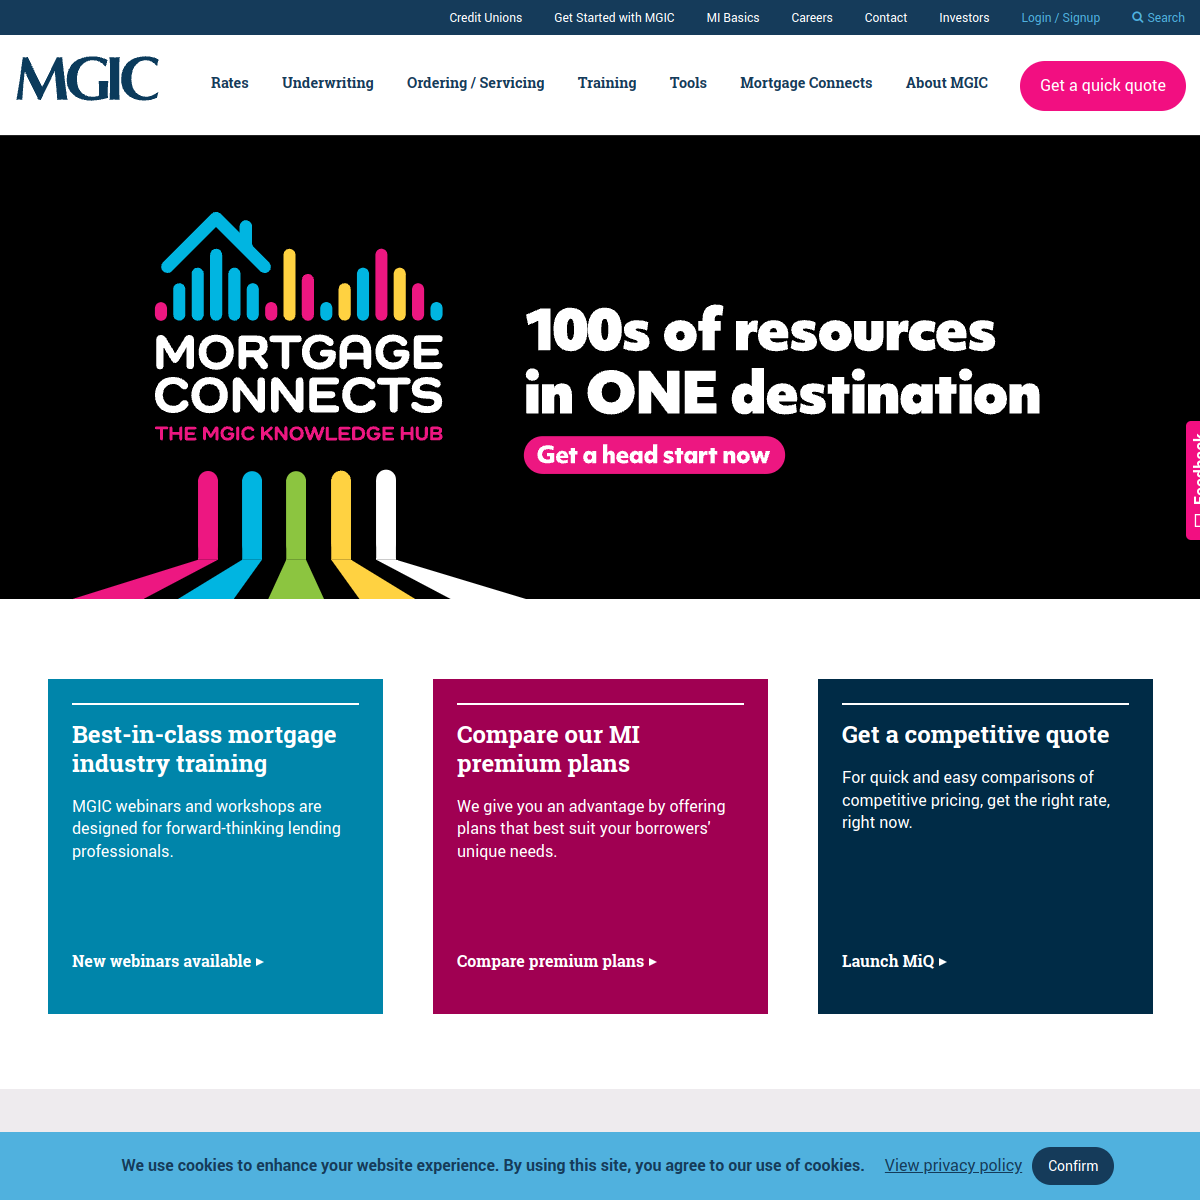 MGIC Investment Website Preview